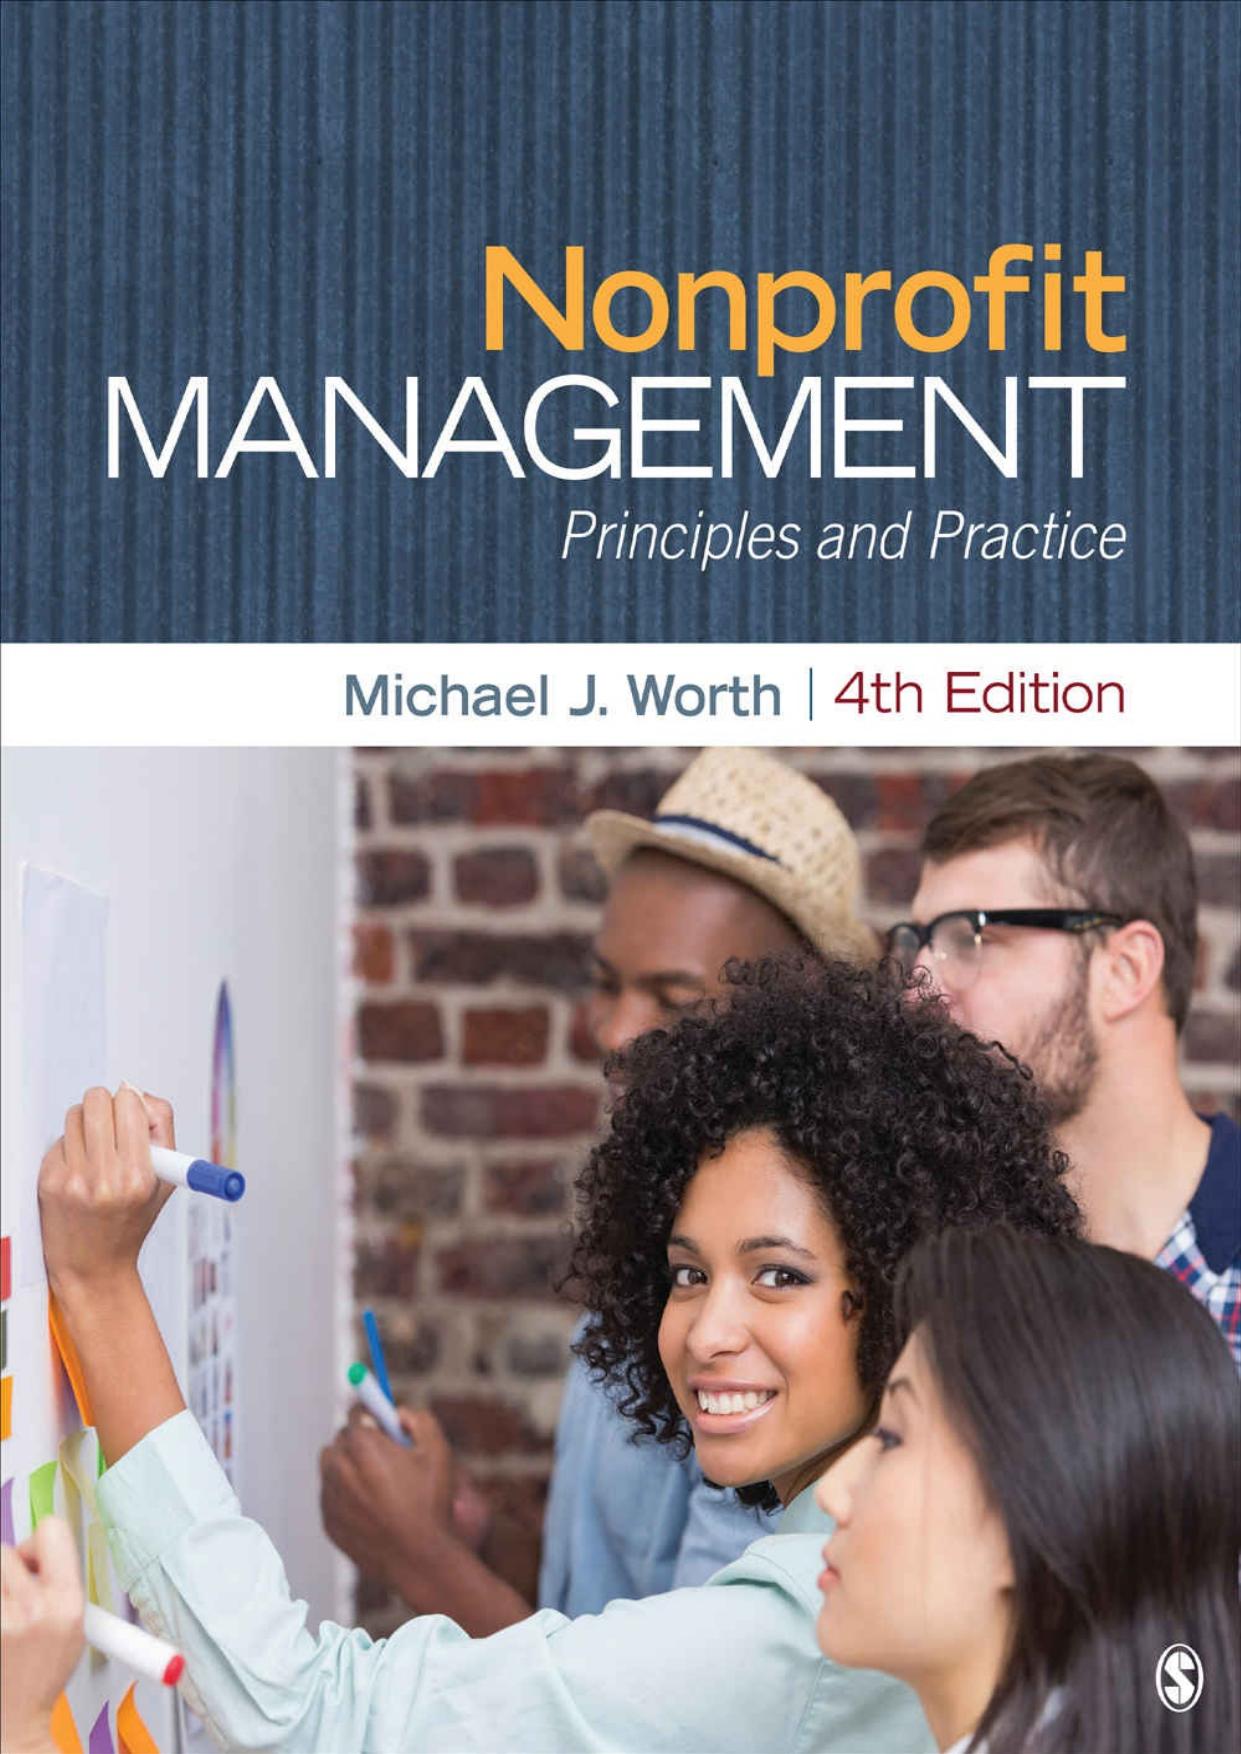 Nonprofit Management: Principles and Practice by Michael J. Worth